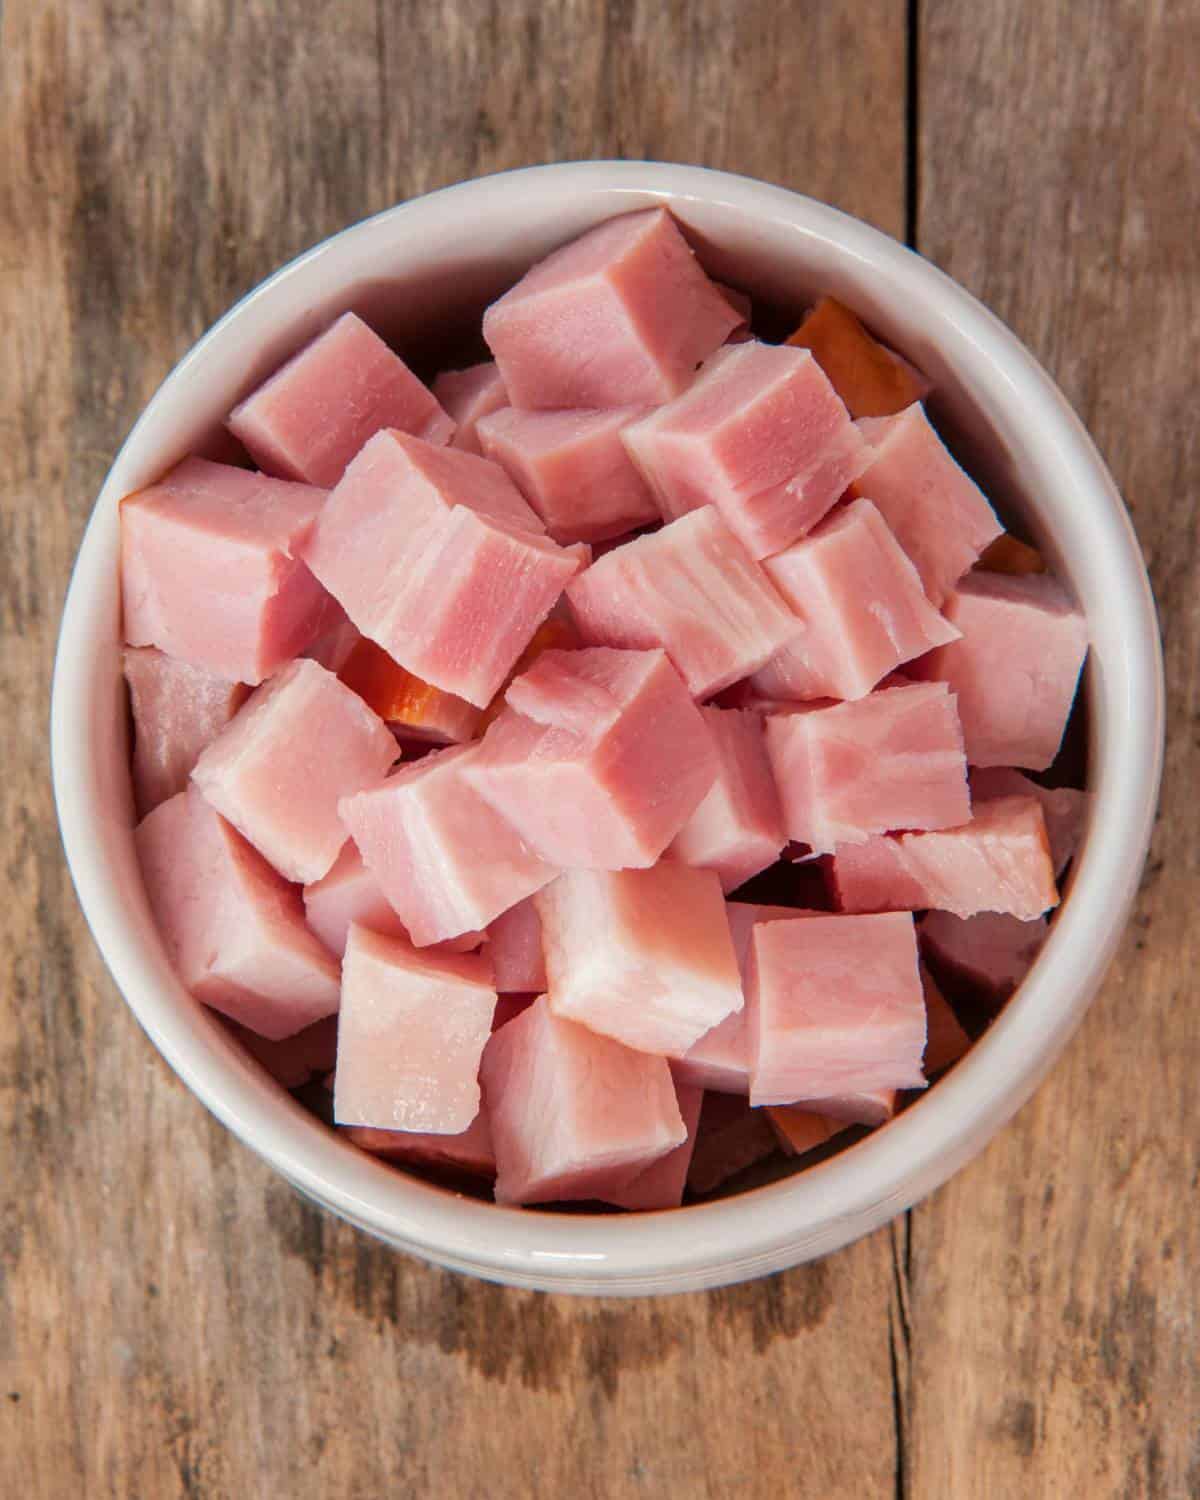 Ham cubes in a bowl on a wooden table.